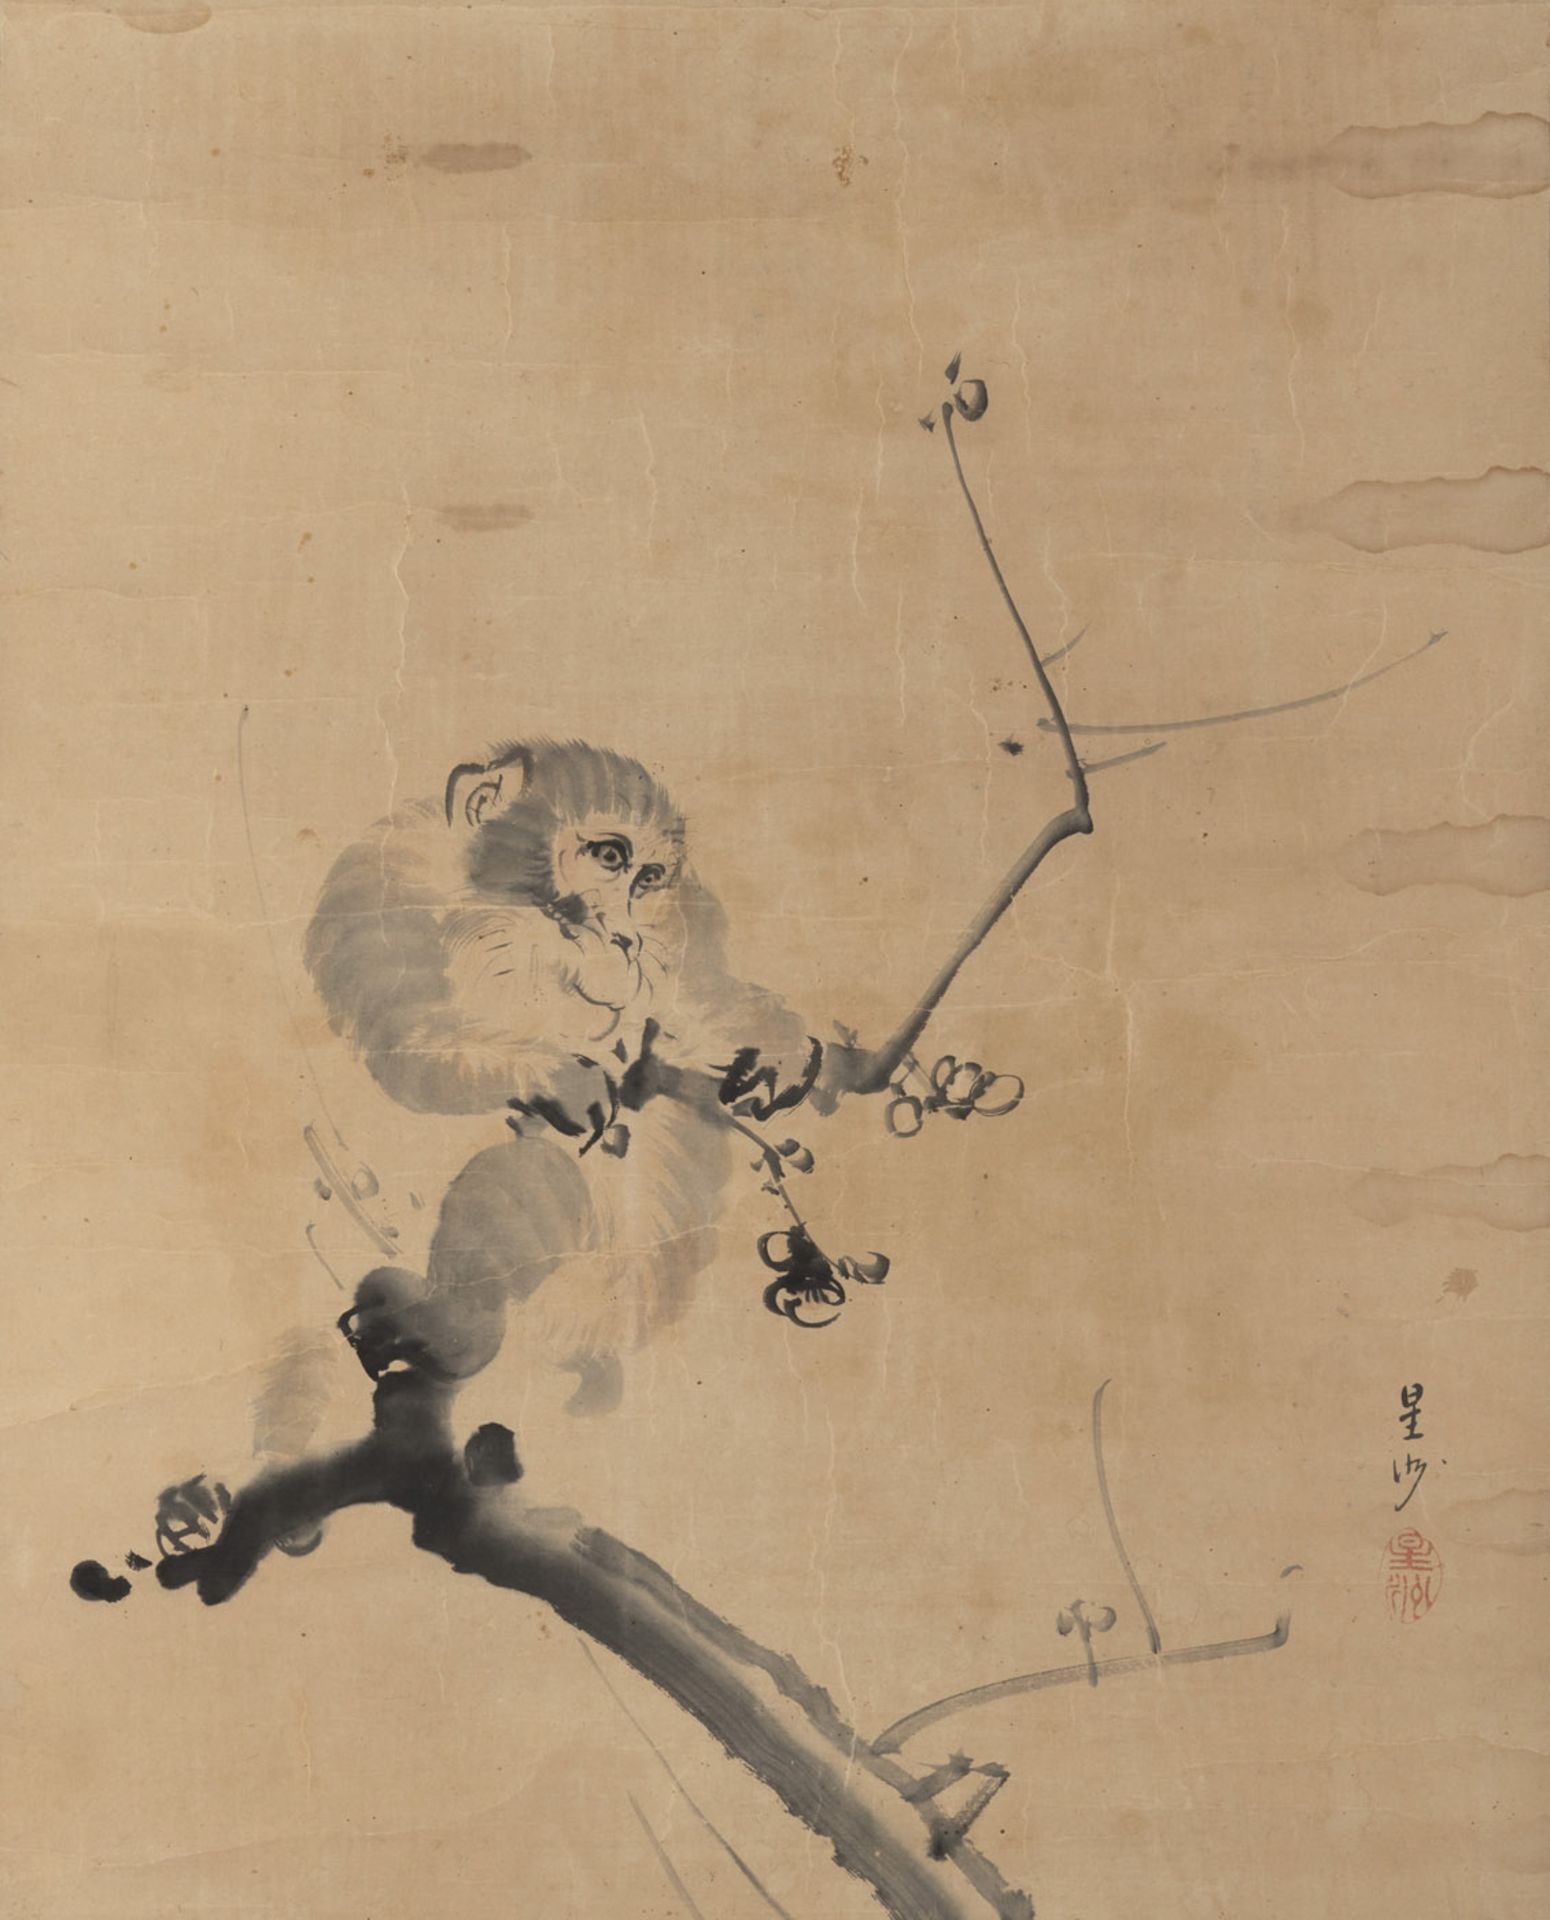 TWO PAINTINGS OF A MAN AND MONKEY AS HANGING SCROLLS